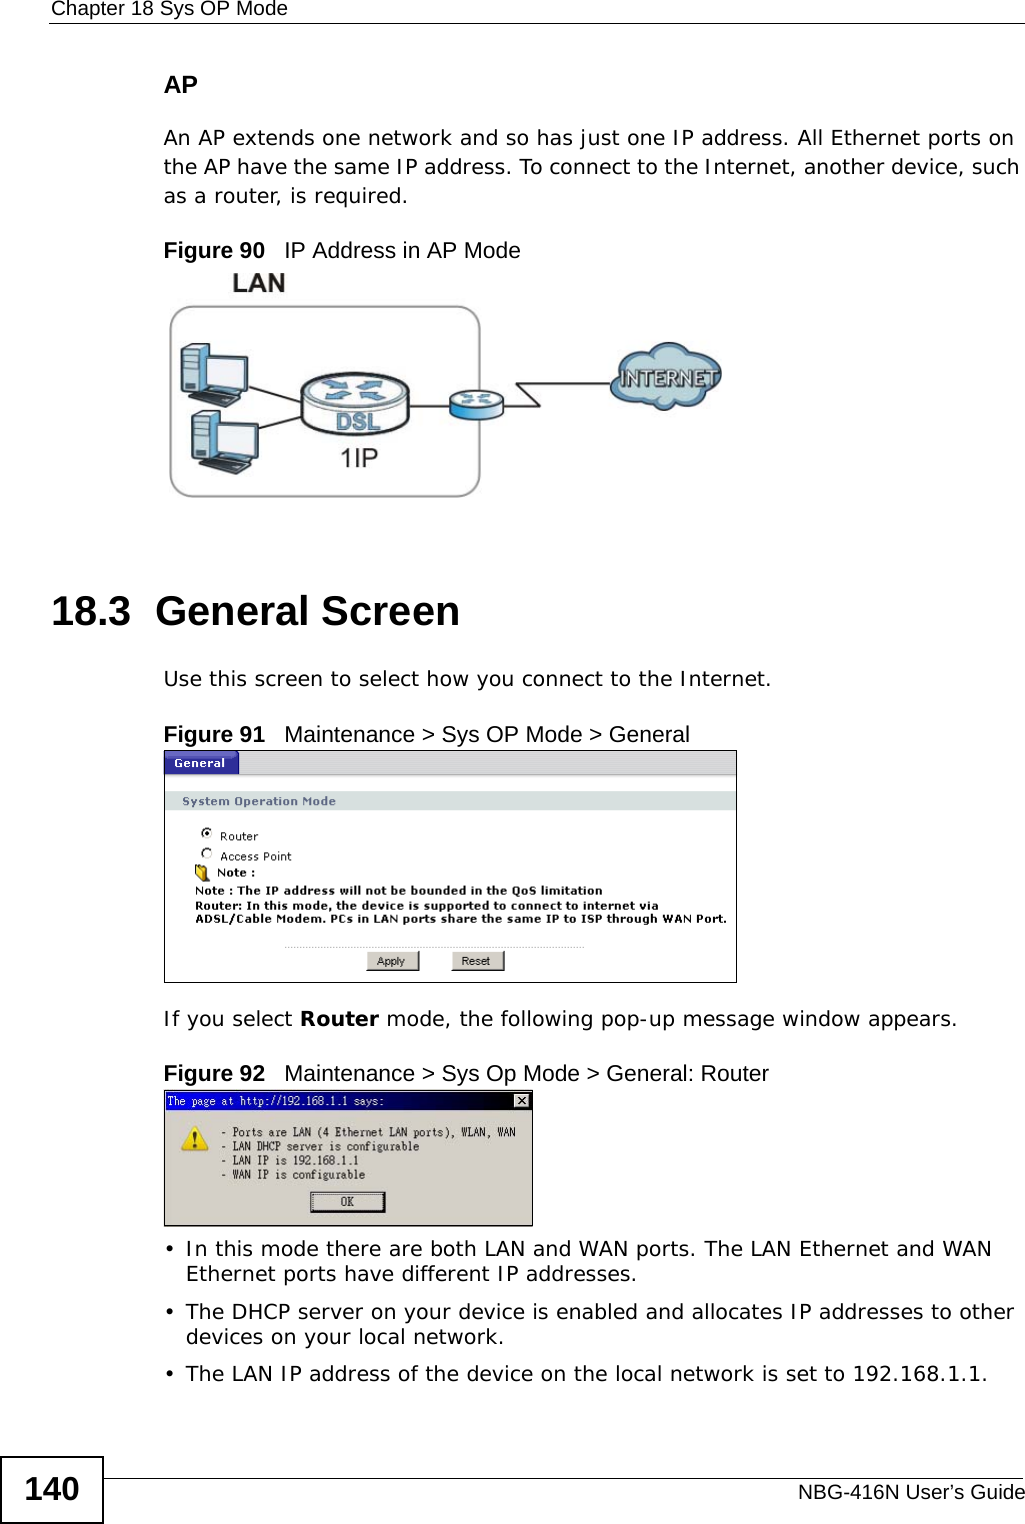 Chapter 18 Sys OP ModeNBG-416N User’s Guide140APAn AP extends one network and so has just one IP address. All Ethernet ports on the AP have the same IP address. To connect to the Internet, another device, such as a router, is required.Figure 90   IP Address in AP Mode18.3  General ScreenUse this screen to select how you connect to the Internet. Figure 91   Maintenance &gt; Sys OP Mode &gt; General If you select Router mode, the following pop-up message window appears.Figure 92   Maintenance &gt; Sys Op Mode &gt; General: Router • In this mode there are both LAN and WAN ports. The LAN Ethernet and WAN Ethernet ports have different IP addresses. • The DHCP server on your device is enabled and allocates IP addresses to other devices on your local network. • The LAN IP address of the device on the local network is set to 192.168.1.1.